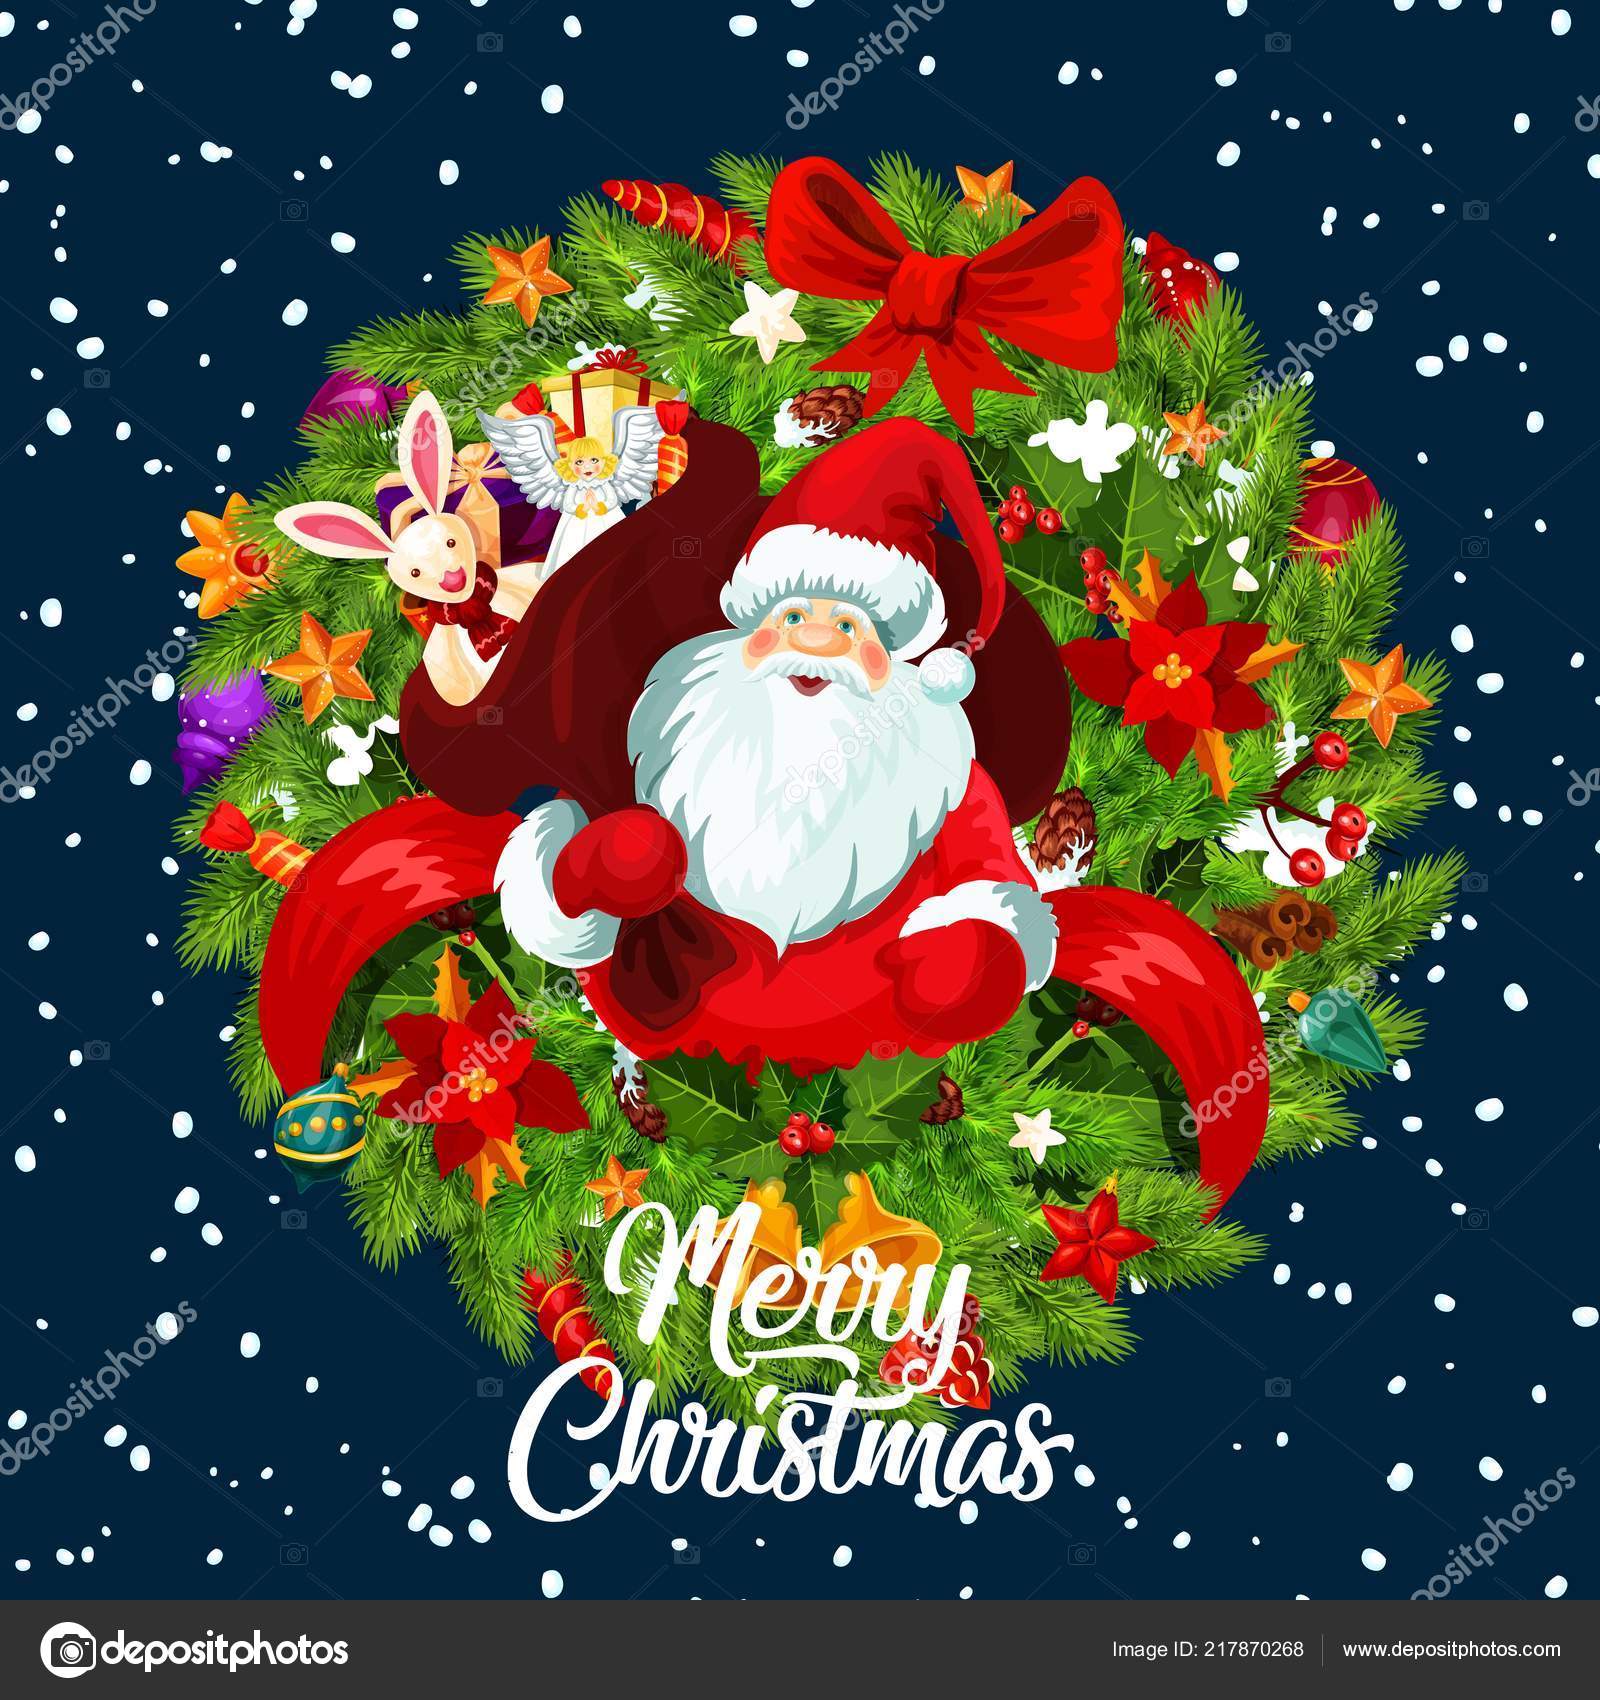 Santa Claus with Christmas Wreath Holiday Greeting Cards 